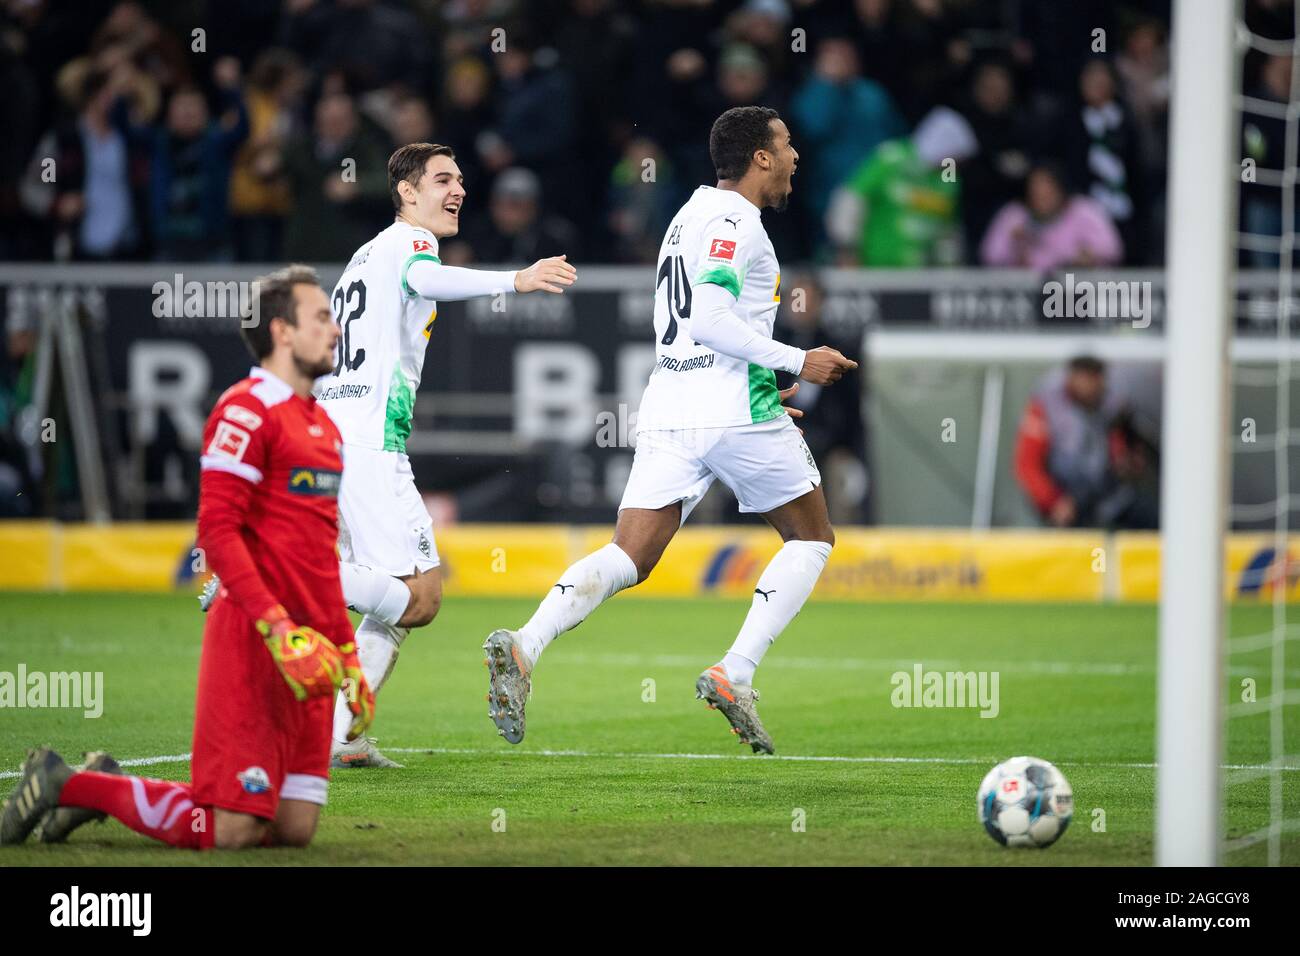 18 December 2019, North Rhine-Westphalia, Mönchengladbach: Soccer: Bundesliga, Borussia Mönchengladbach - SC Paderborn 07, 16th matchday in Borussia-Park. Gladbach's scorers Alassane Plea (r) and Florian Neuhaus (M) cheer for a 1-0 lead after the goal. On the left Paderborn's goalkeeper Leopold Zingerle. Photo: Marius Becker/dpa - IMPORTANT NOTE: In accordance with the requirements of the DFL Deutsche Fußball Liga or the DFB Deutscher Fußball-Bund, it is prohibited to use or have used photographs taken in the stadium and/or the match in the form of sequence images and/or video-like photo seque Stock Photo